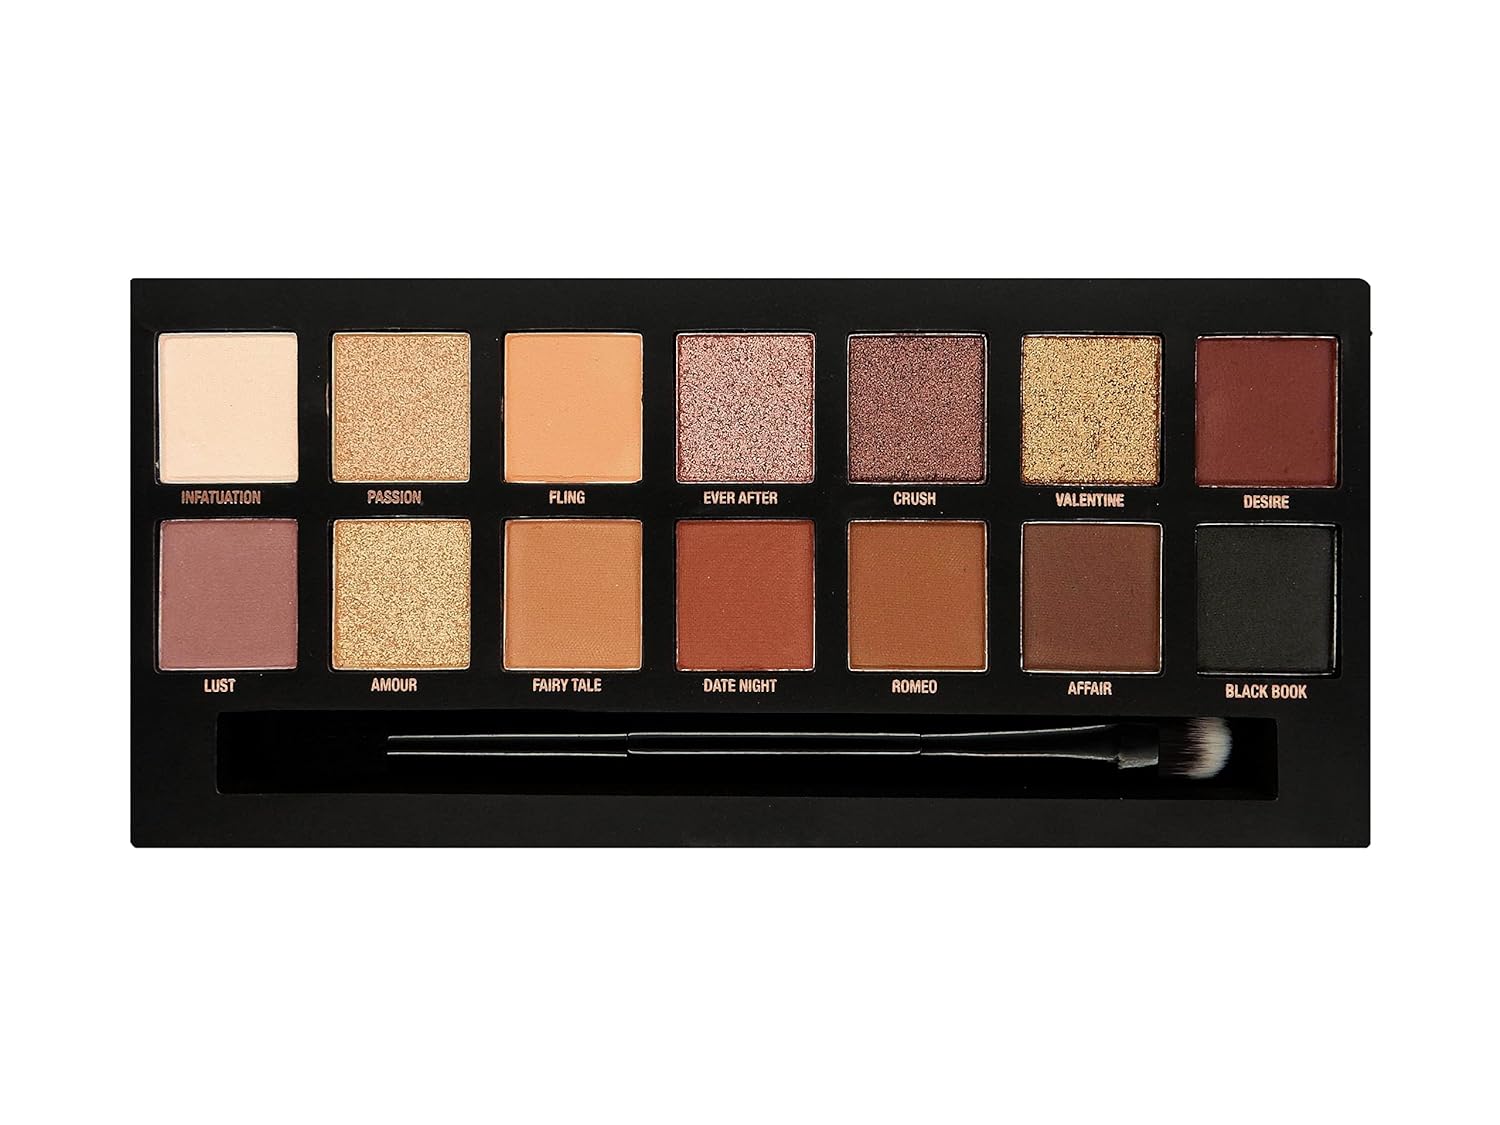 W7 Romanced Eyeshadow Palette - 12 Natural, Pink Nude Colors - Flawless Long-Lasting Makeup : Beauty & Personal Care